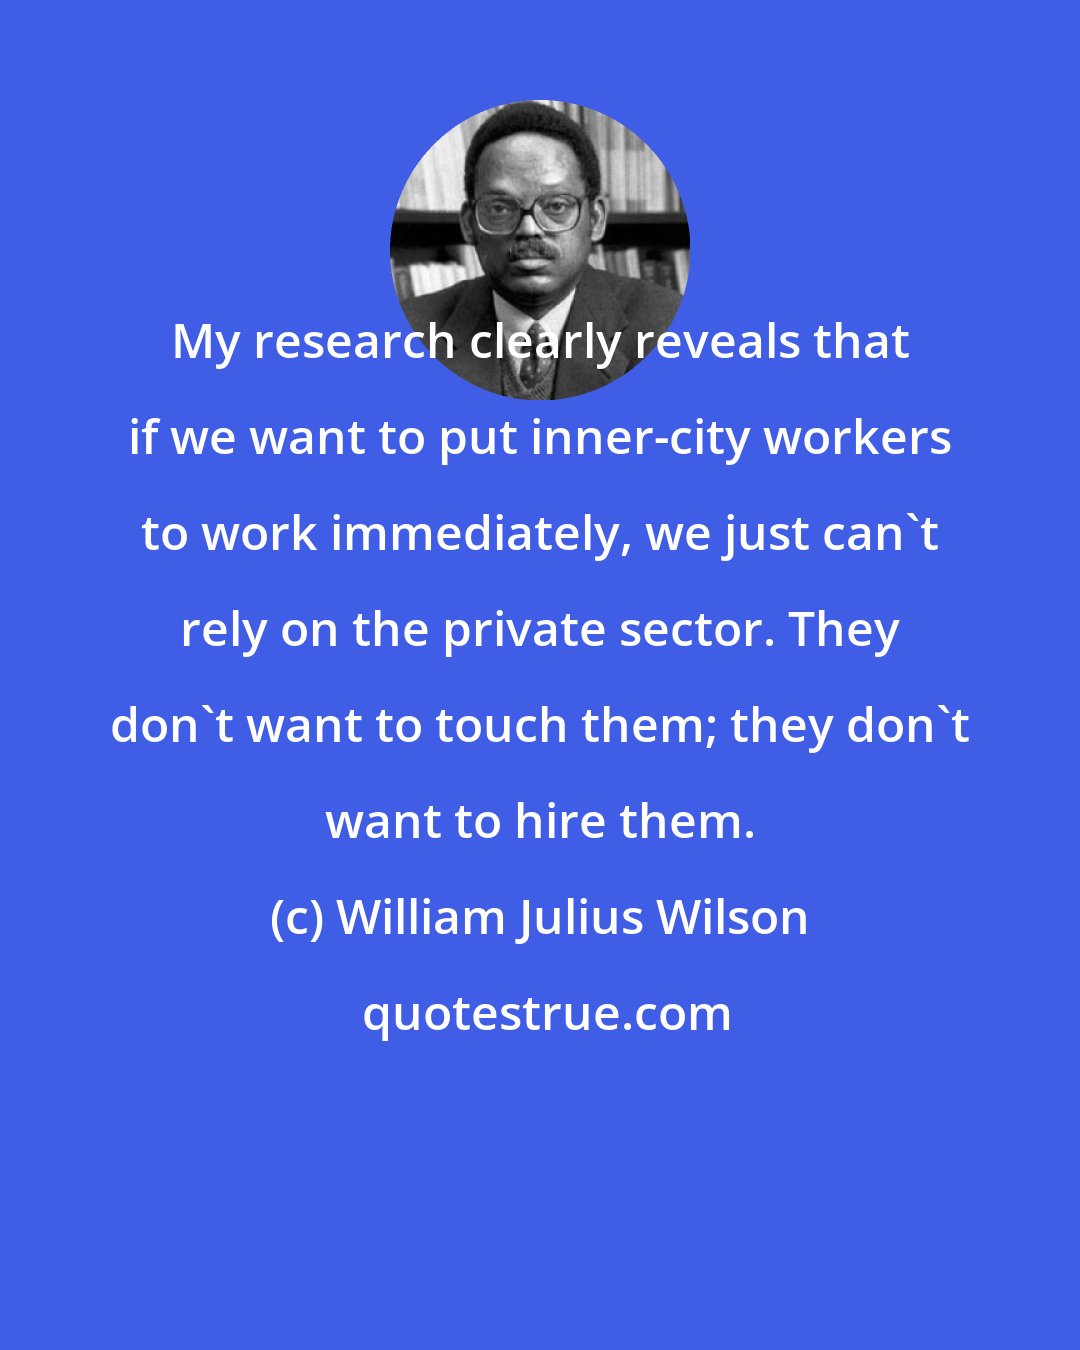 William Julius Wilson: My research clearly reveals that if we want to put inner-city workers to work immediately, we just can't rely on the private sector. They don't want to touch them; they don't want to hire them.